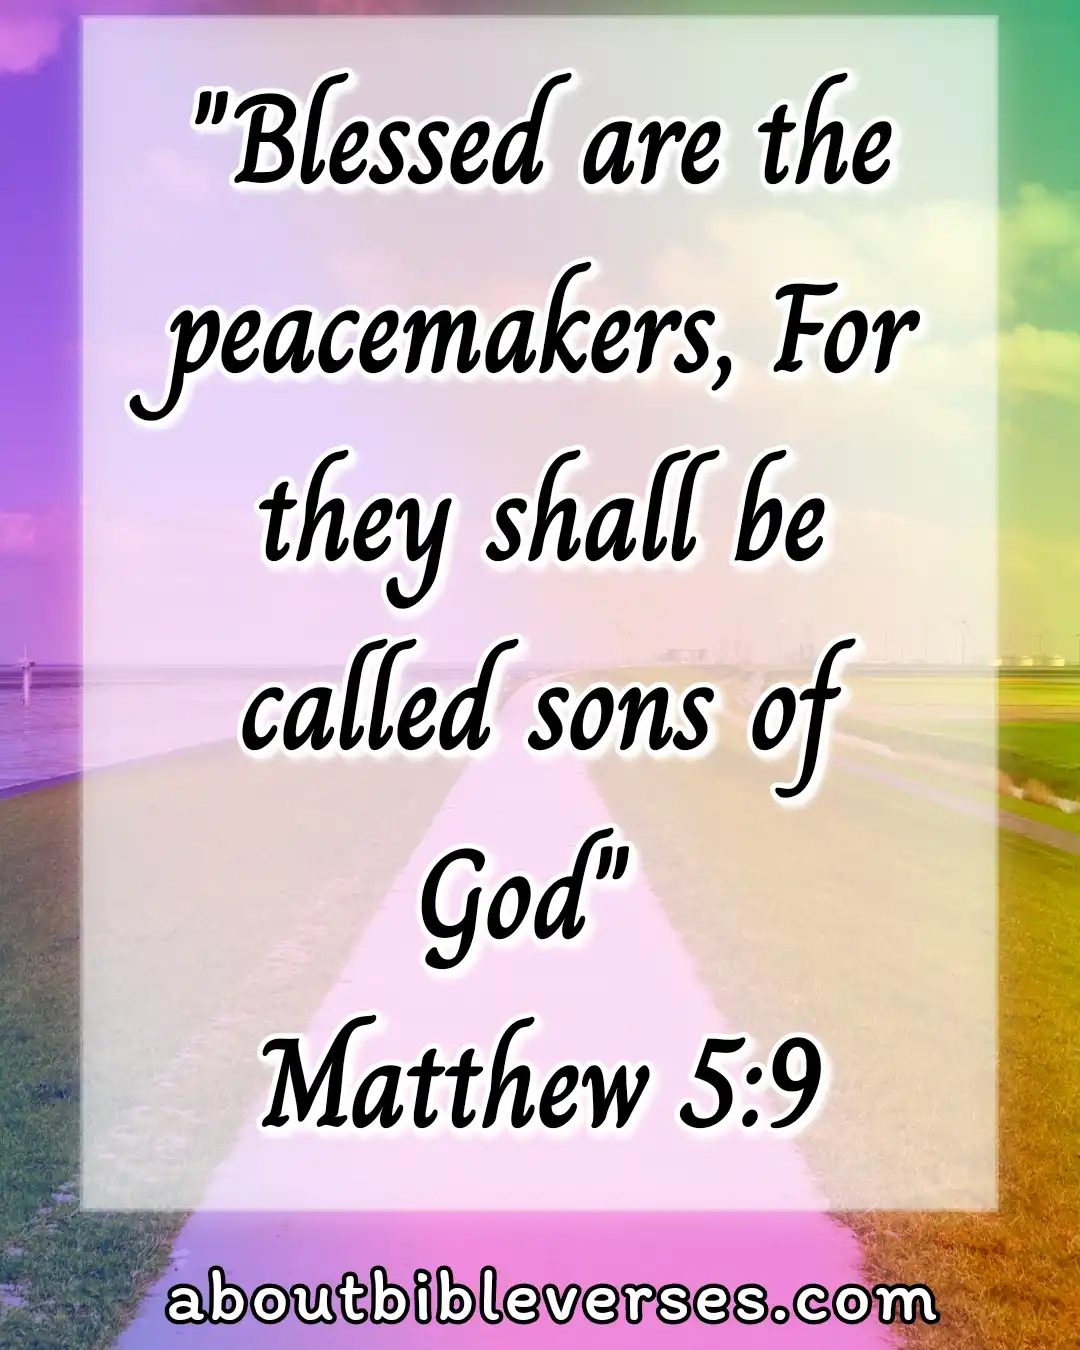 Bible Verses About Conflict Resolution (Matthew 5:9)